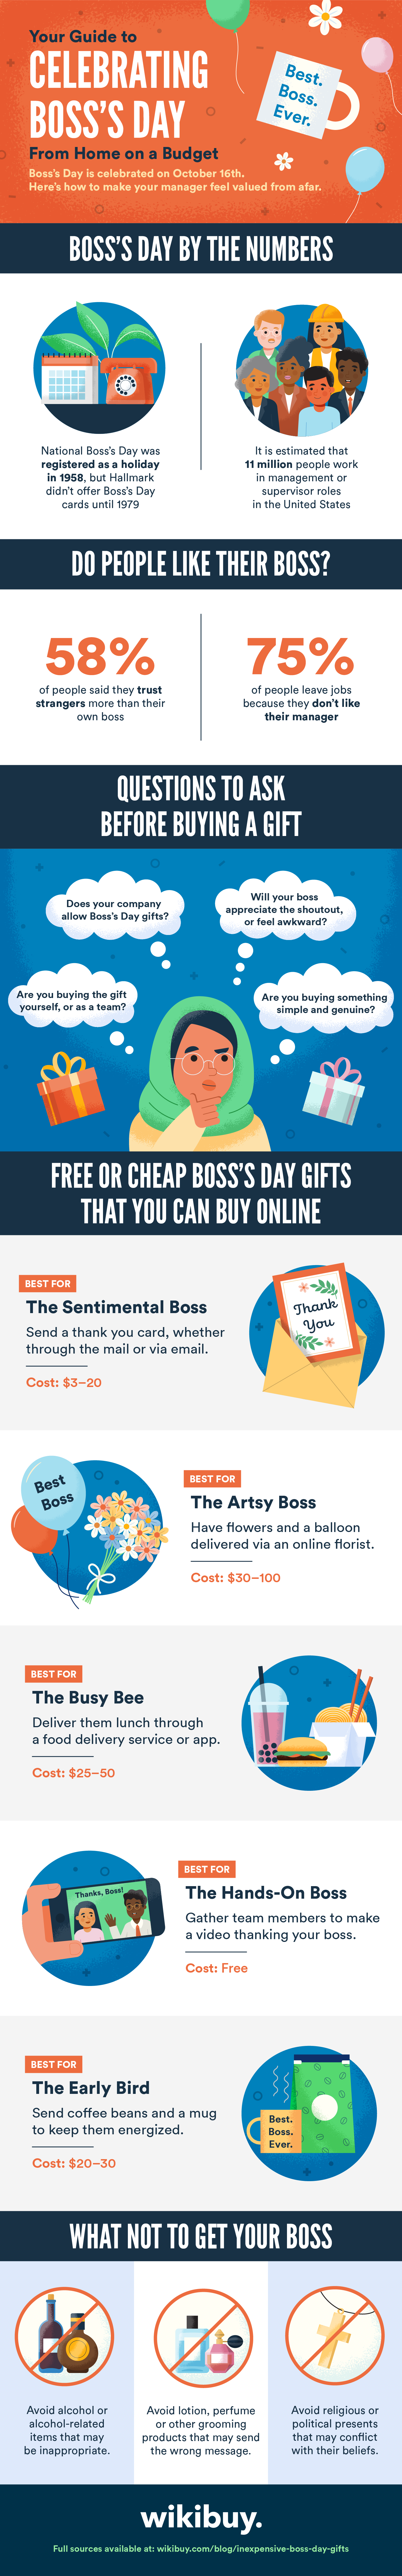 Happy Boss’s Day! Here’s How to Celebrate Remotely